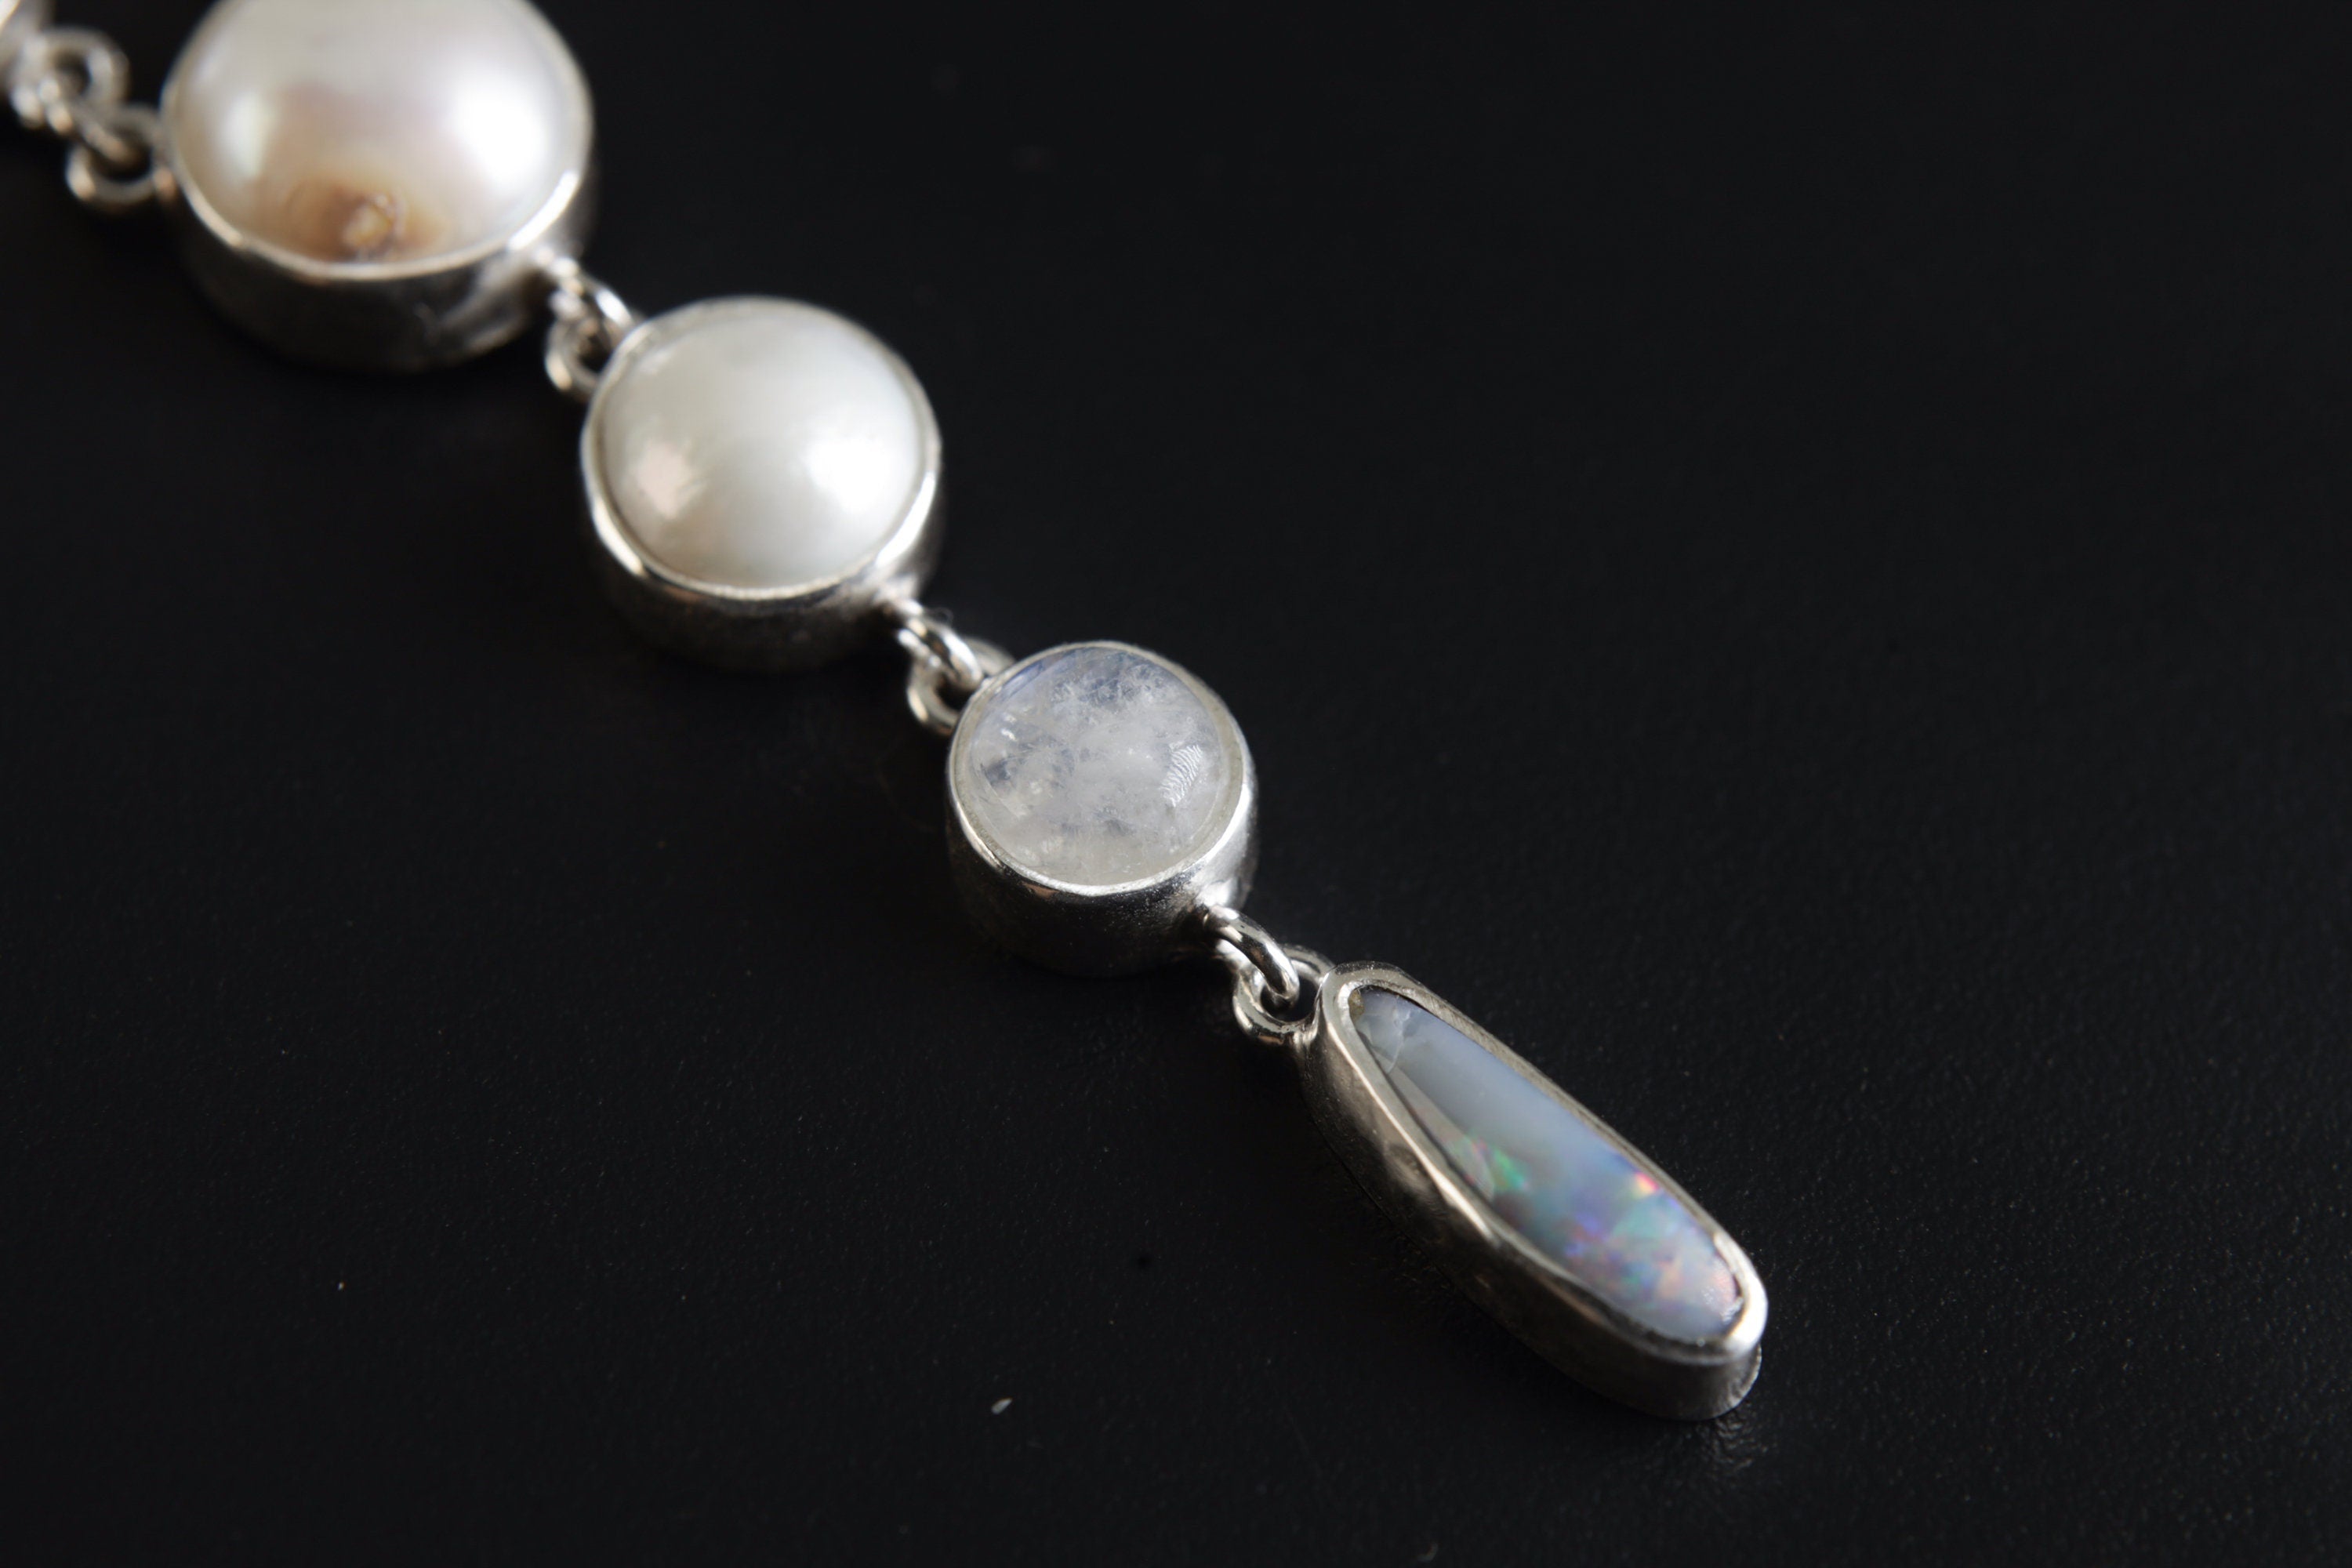 Galactic Embrace South Sea Pear, Blue Moonstone & Opal Pendant - Sterling Silver - High Polish Finish - Hammered Textured